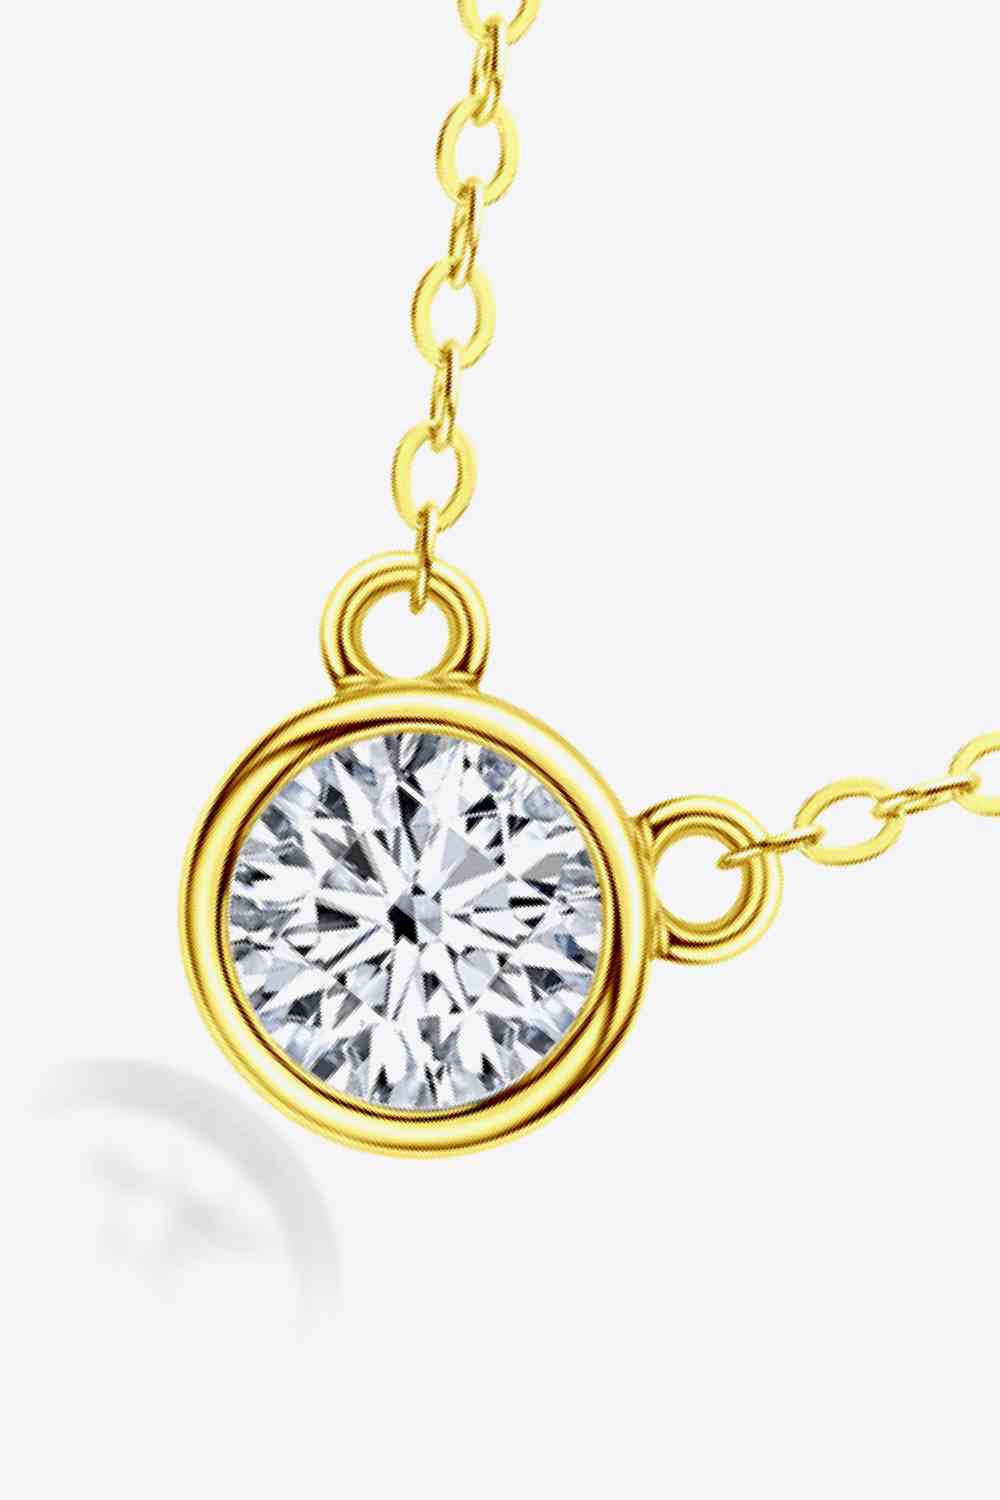 925 Sterling Silver 1 Carat Moissanite Round Pendant Necklace - lolaluxeshop